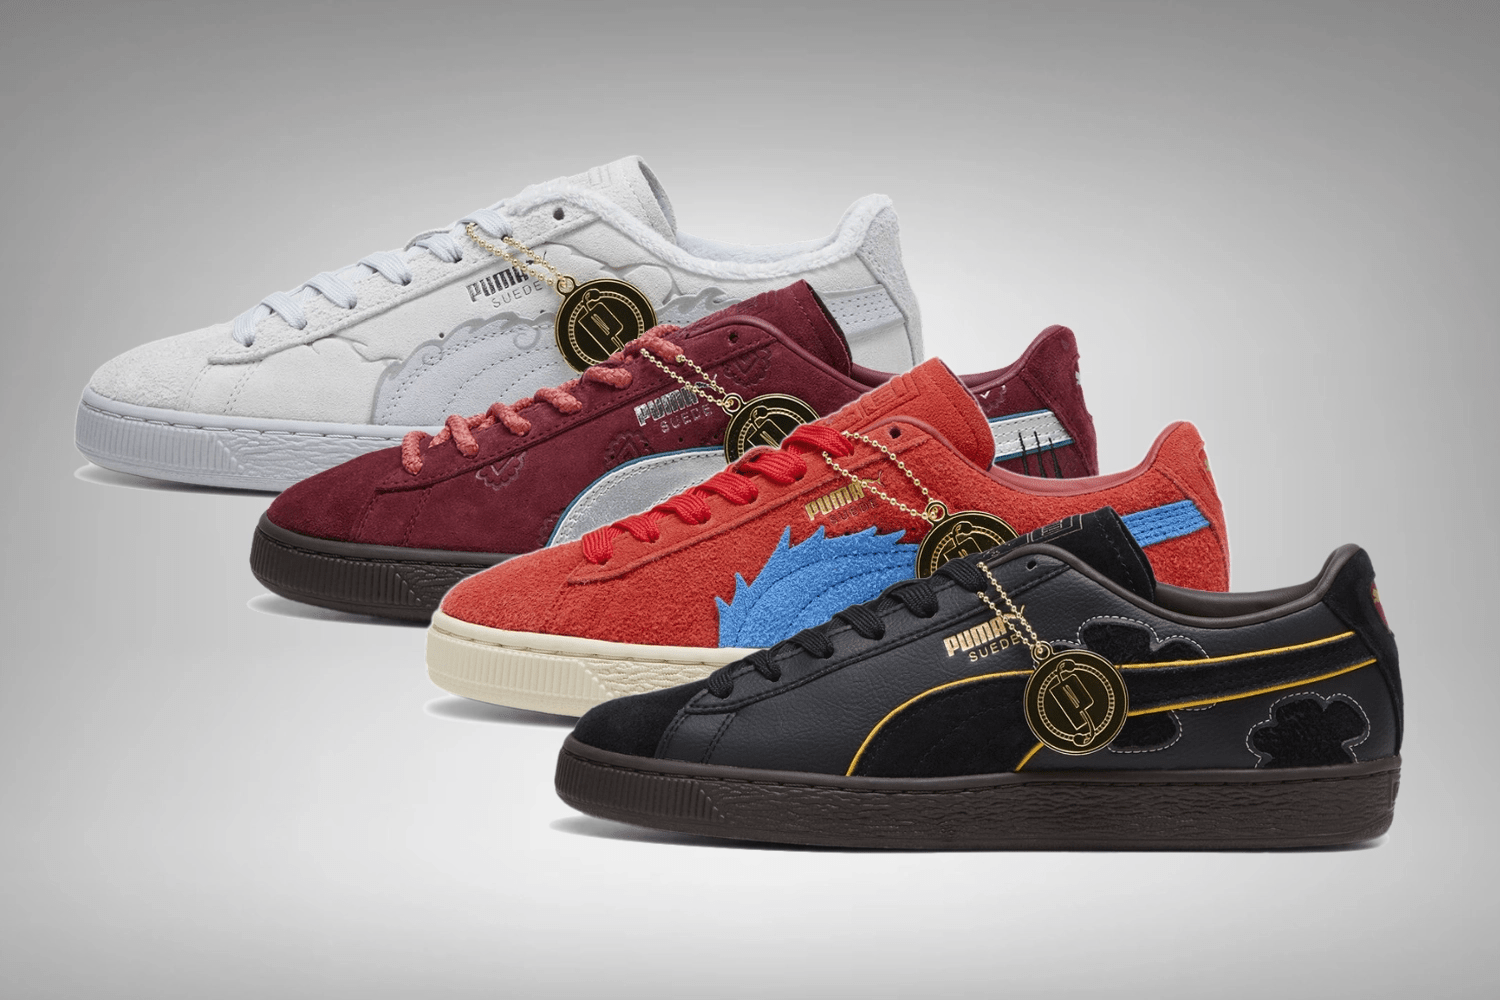 Anime series One Piece inspires new PUMA Suede colorways